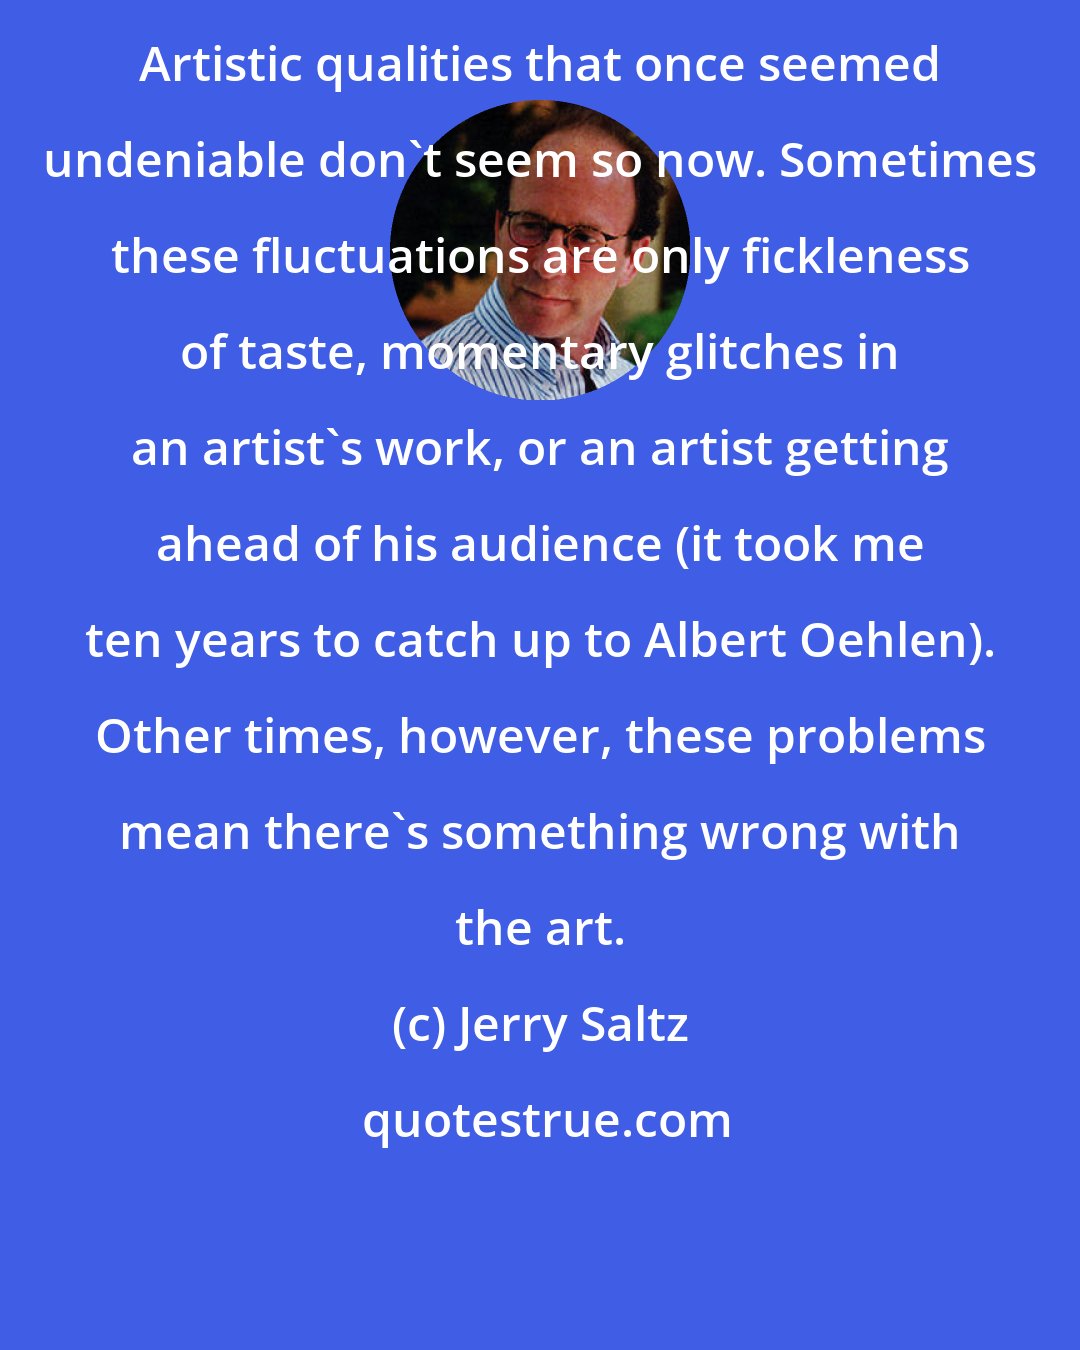 Jerry Saltz: Artistic qualities that once seemed undeniable don't seem so now. Sometimes these fluctuations are only fickleness of taste, momentary glitches in an artist's work, or an artist getting ahead of his audience (it took me ten years to catch up to Albert Oehlen). Other times, however, these problems mean there's something wrong with the art.